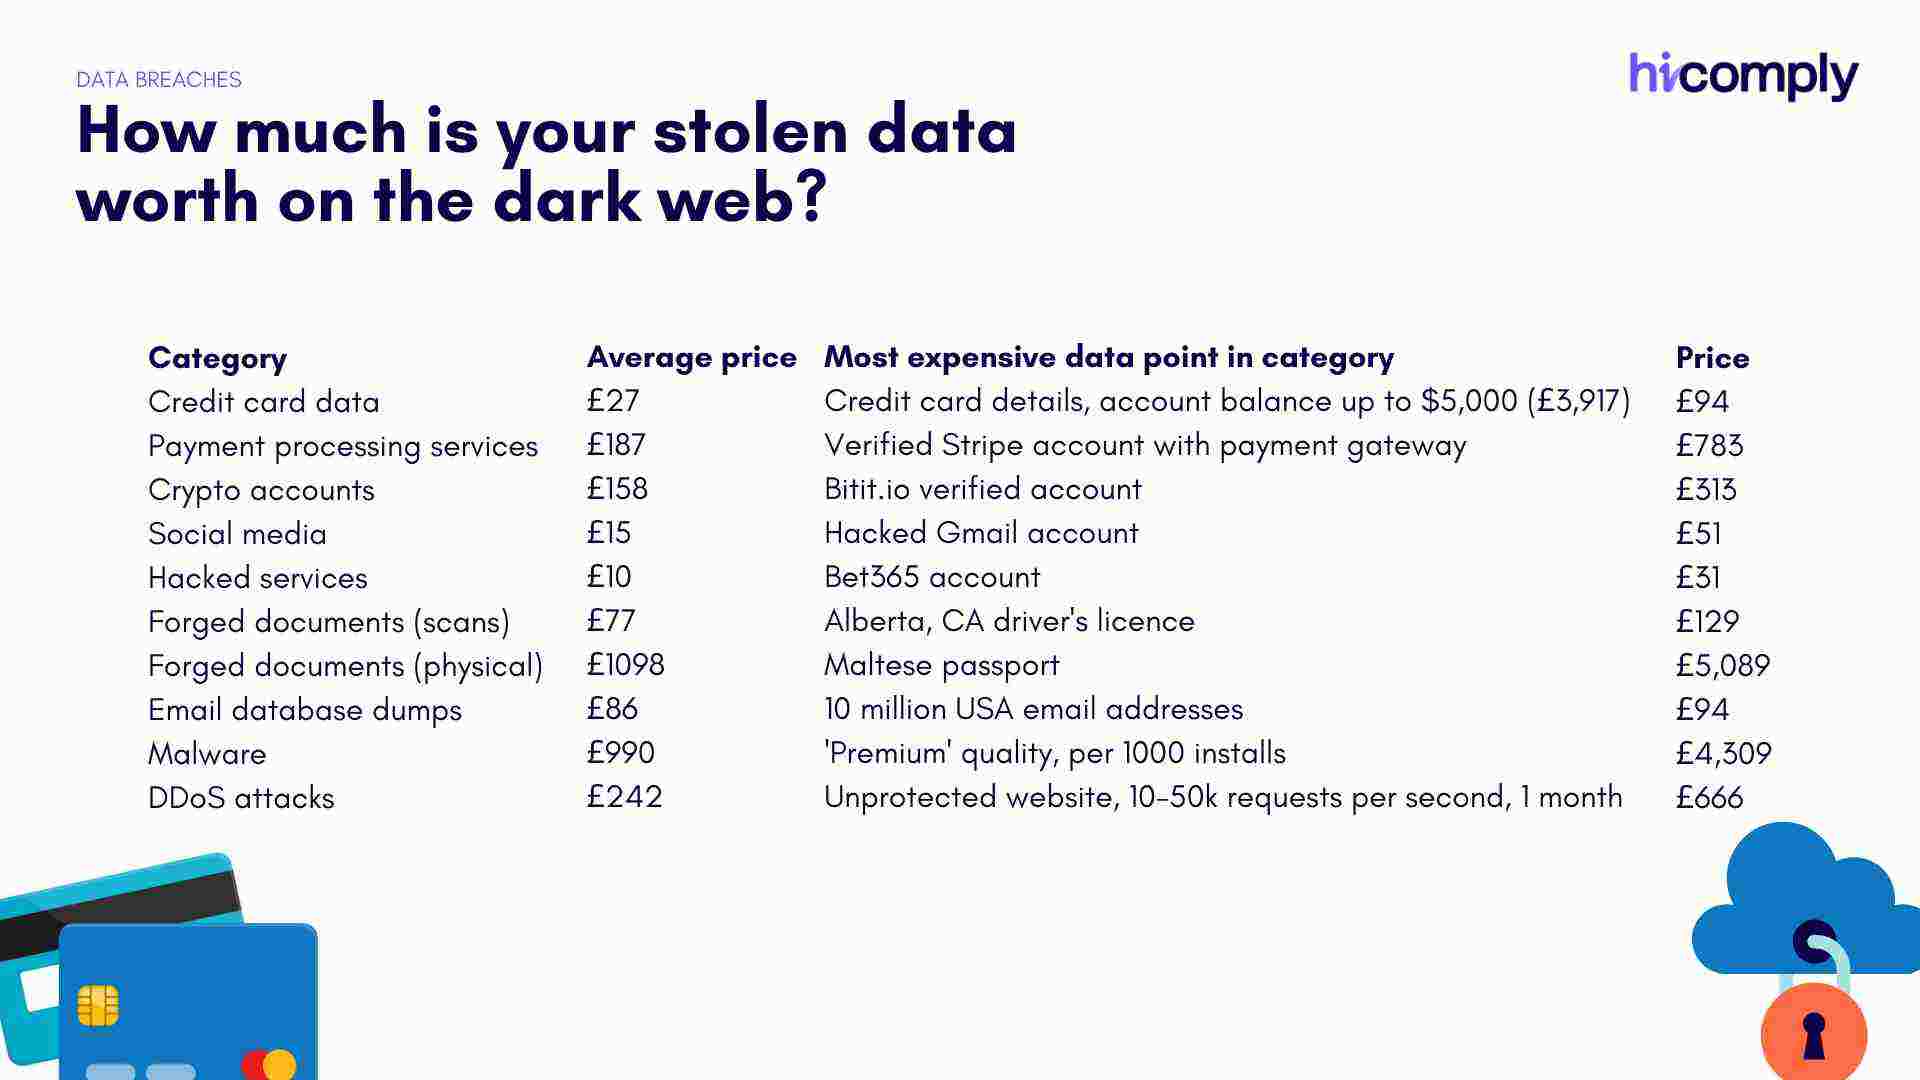 How much is your stolen data worth on the dark web